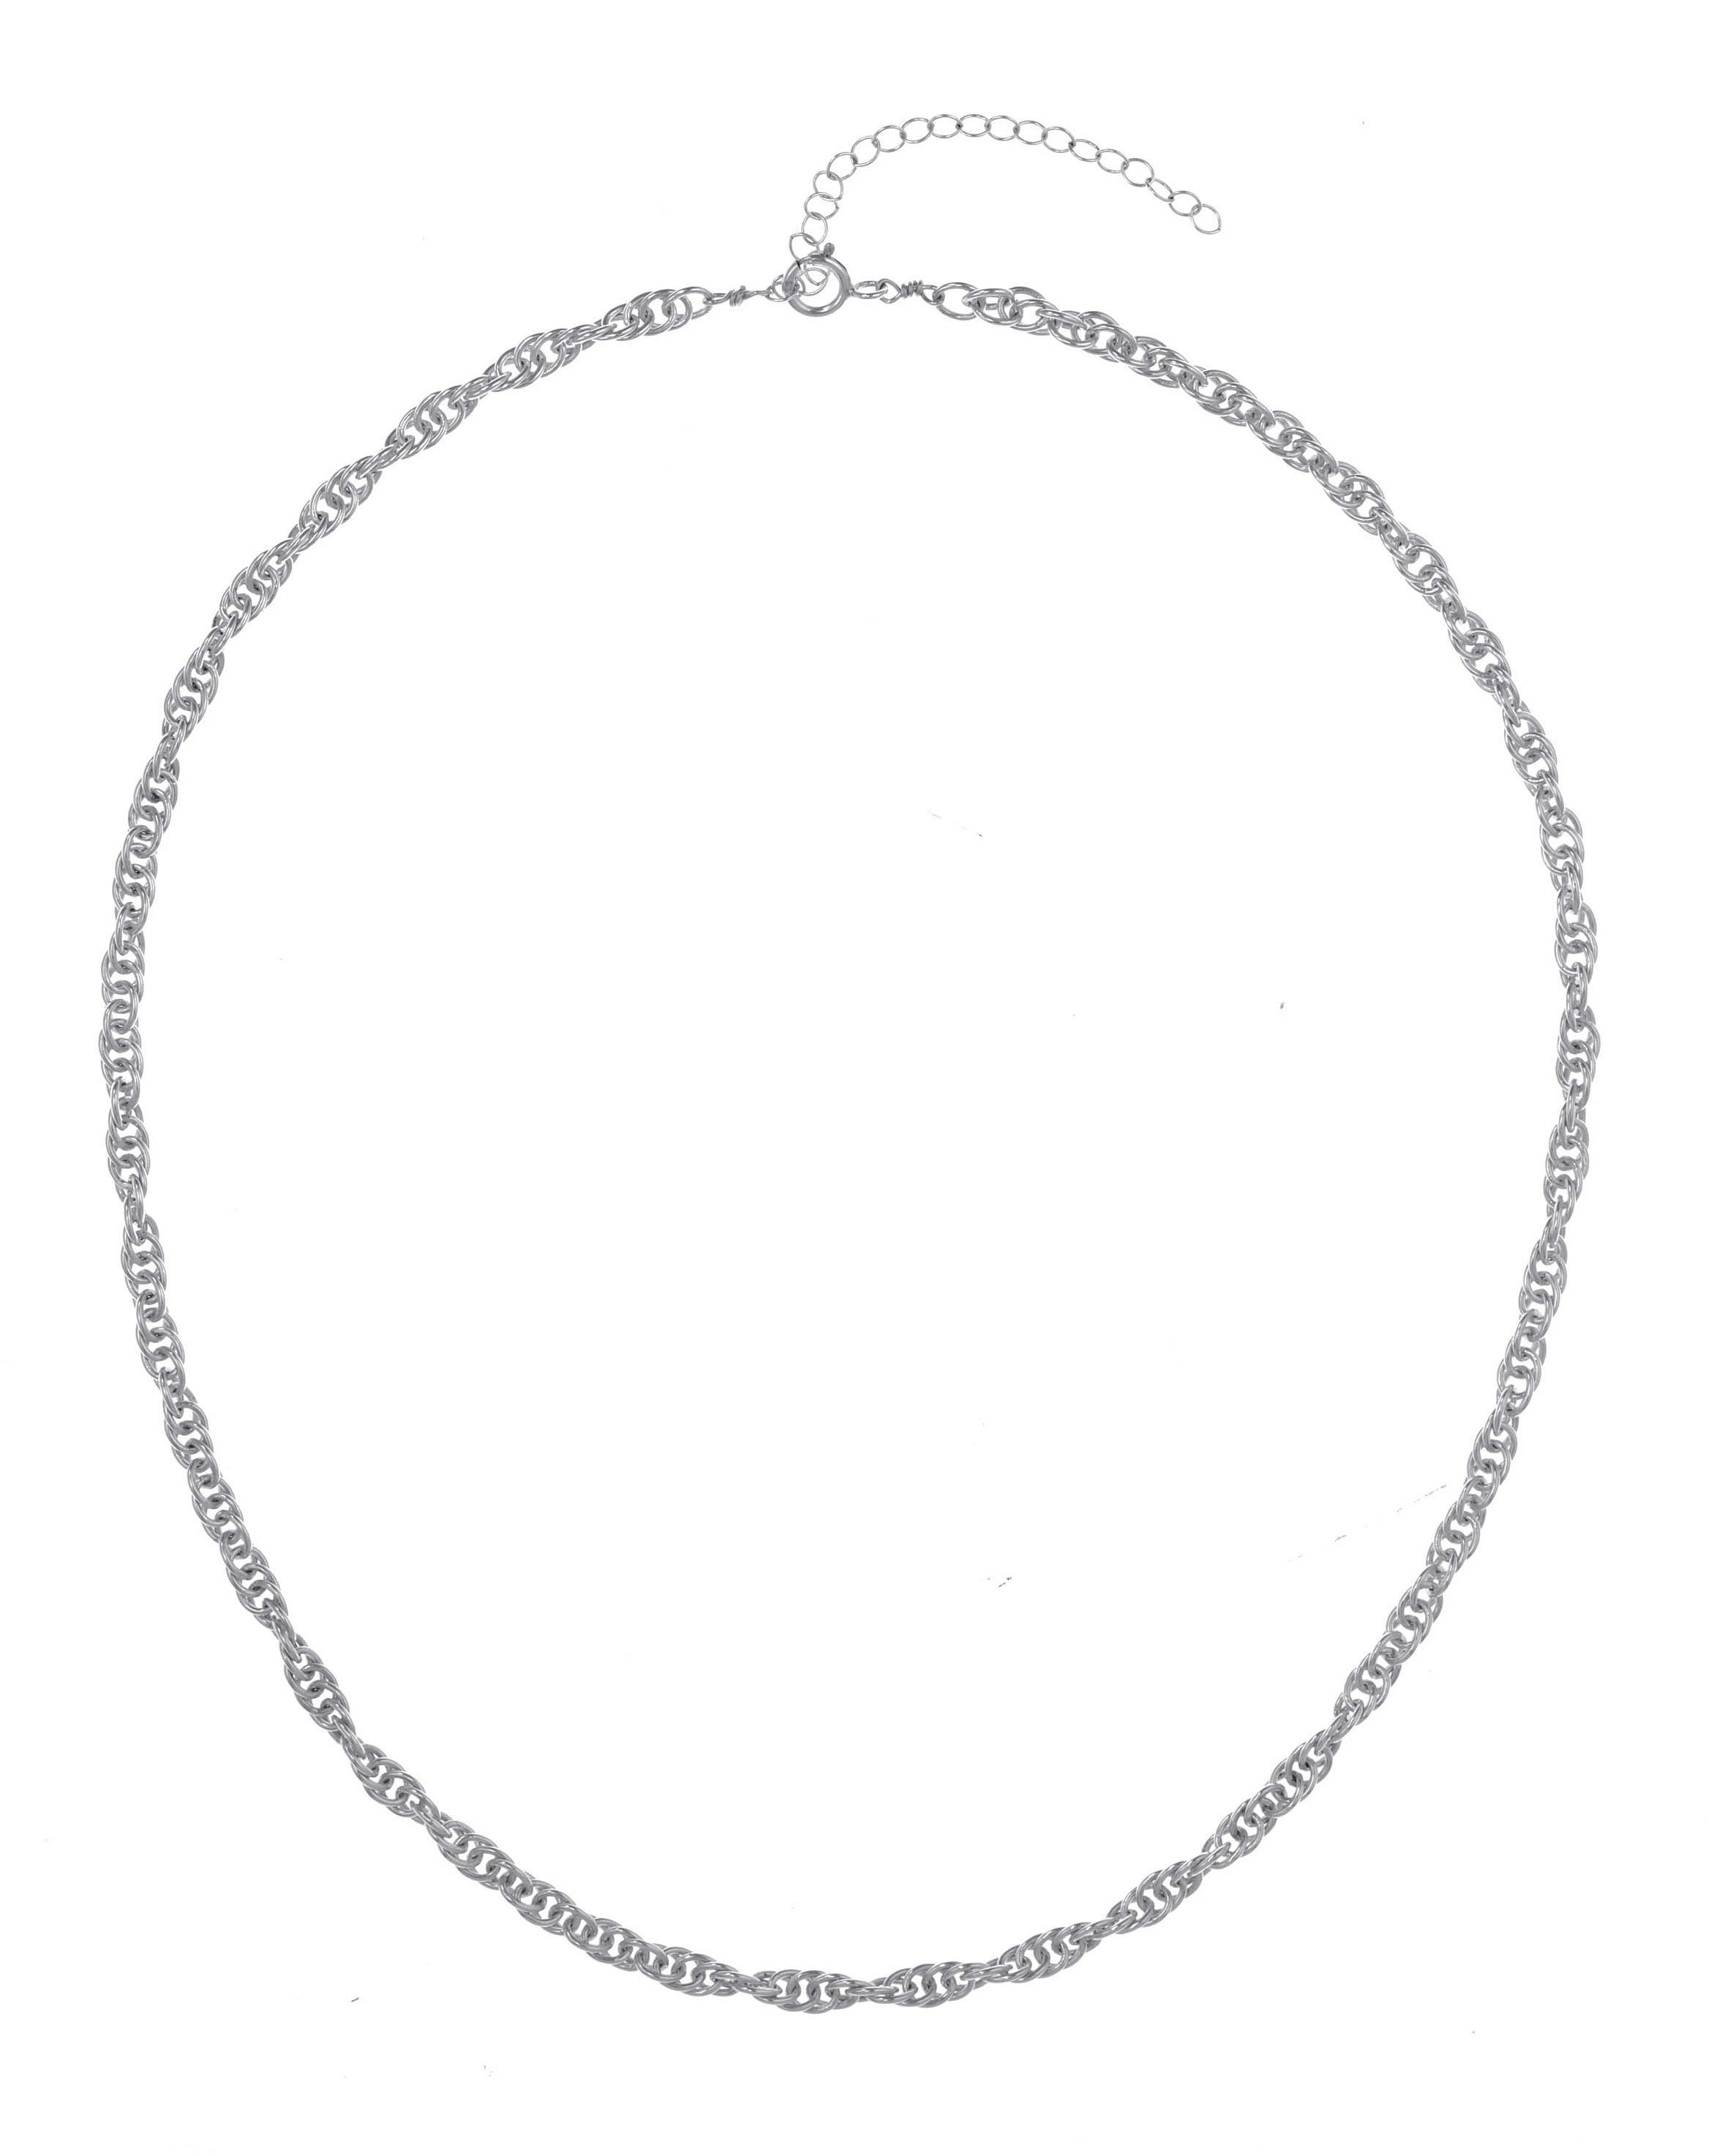 Elizabeth Necklace KOZAKH. A 14 to 16 inch adjustable length, 3.4mm thick twisted rope link chain necklace, crafted in Sterling Silver.